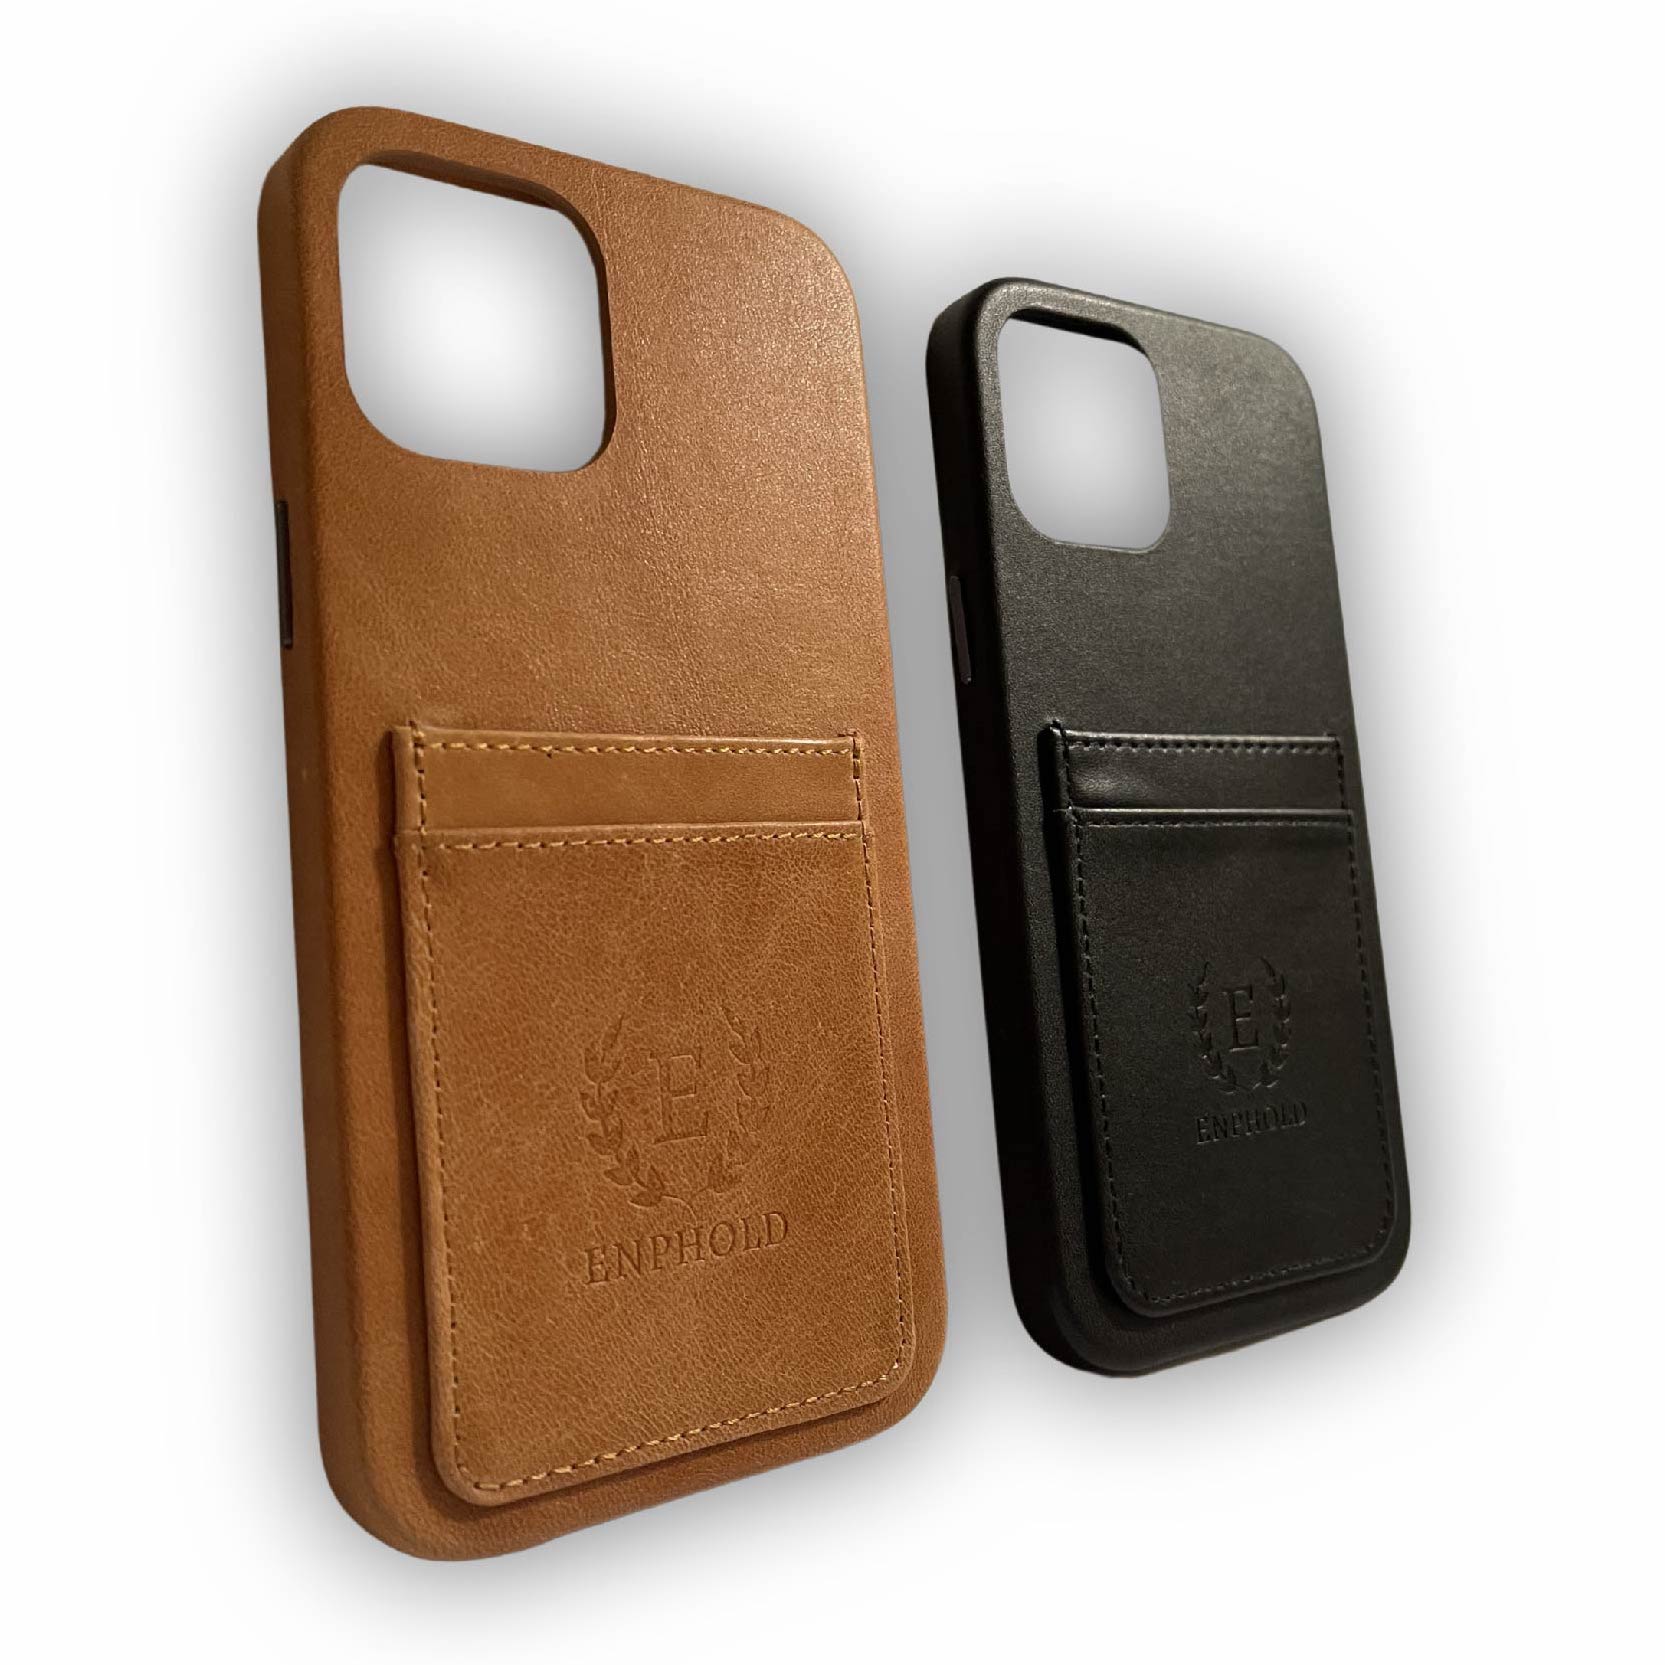 Leather Dual iPhone Case iPhone Wallet 2 Phone Holder -  Ireland